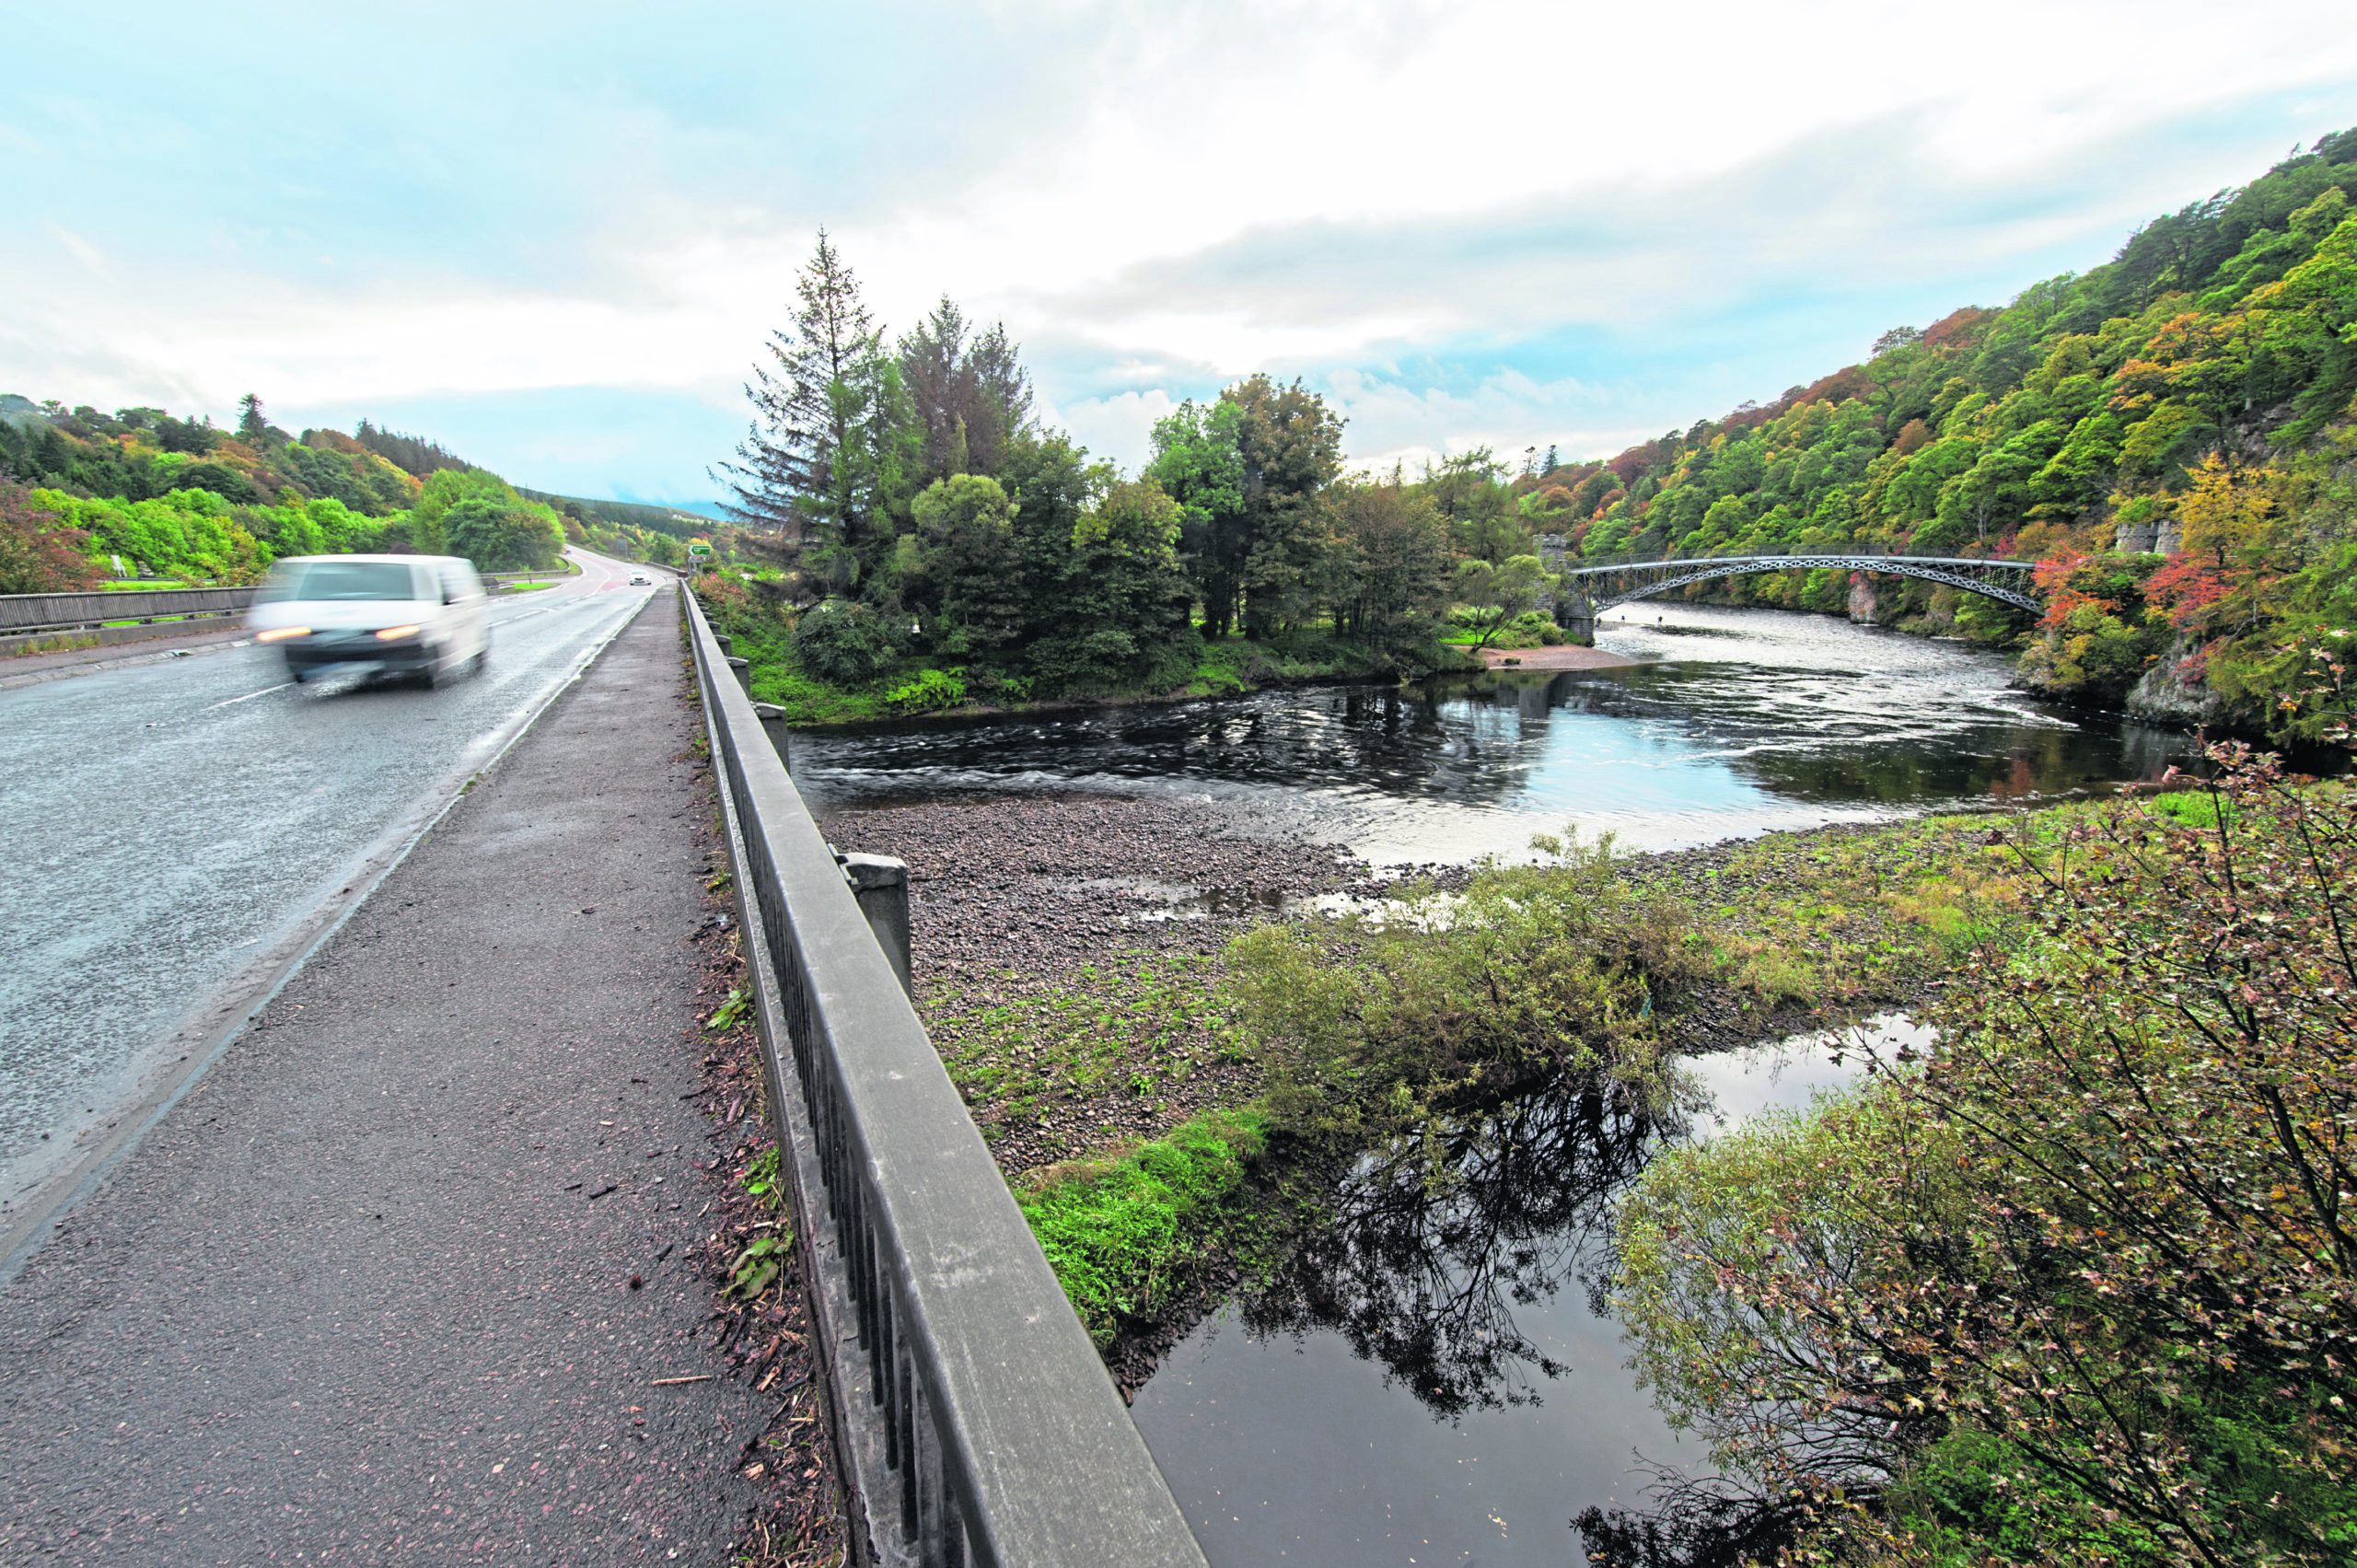 The bridge at Craigellachie due for road works beginning next week.
Picture by Jason Hedges